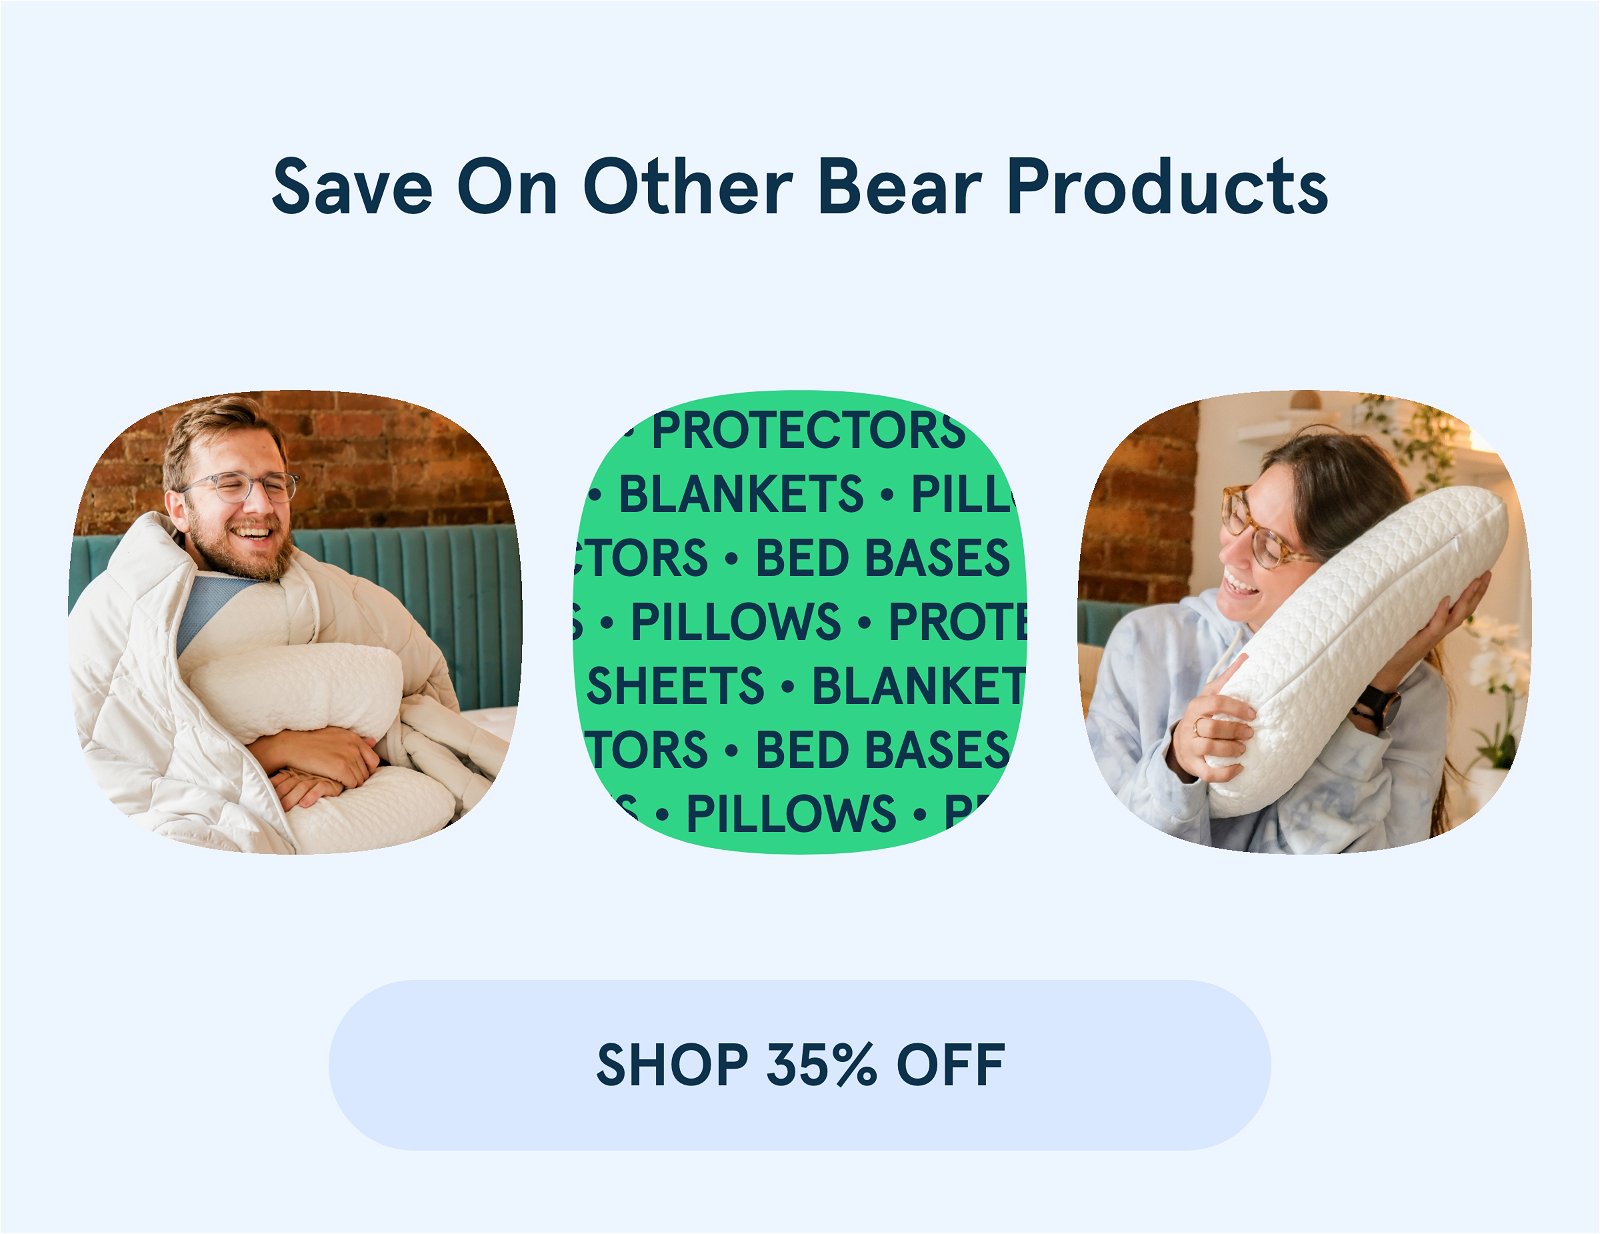 Save on Other Bear Products